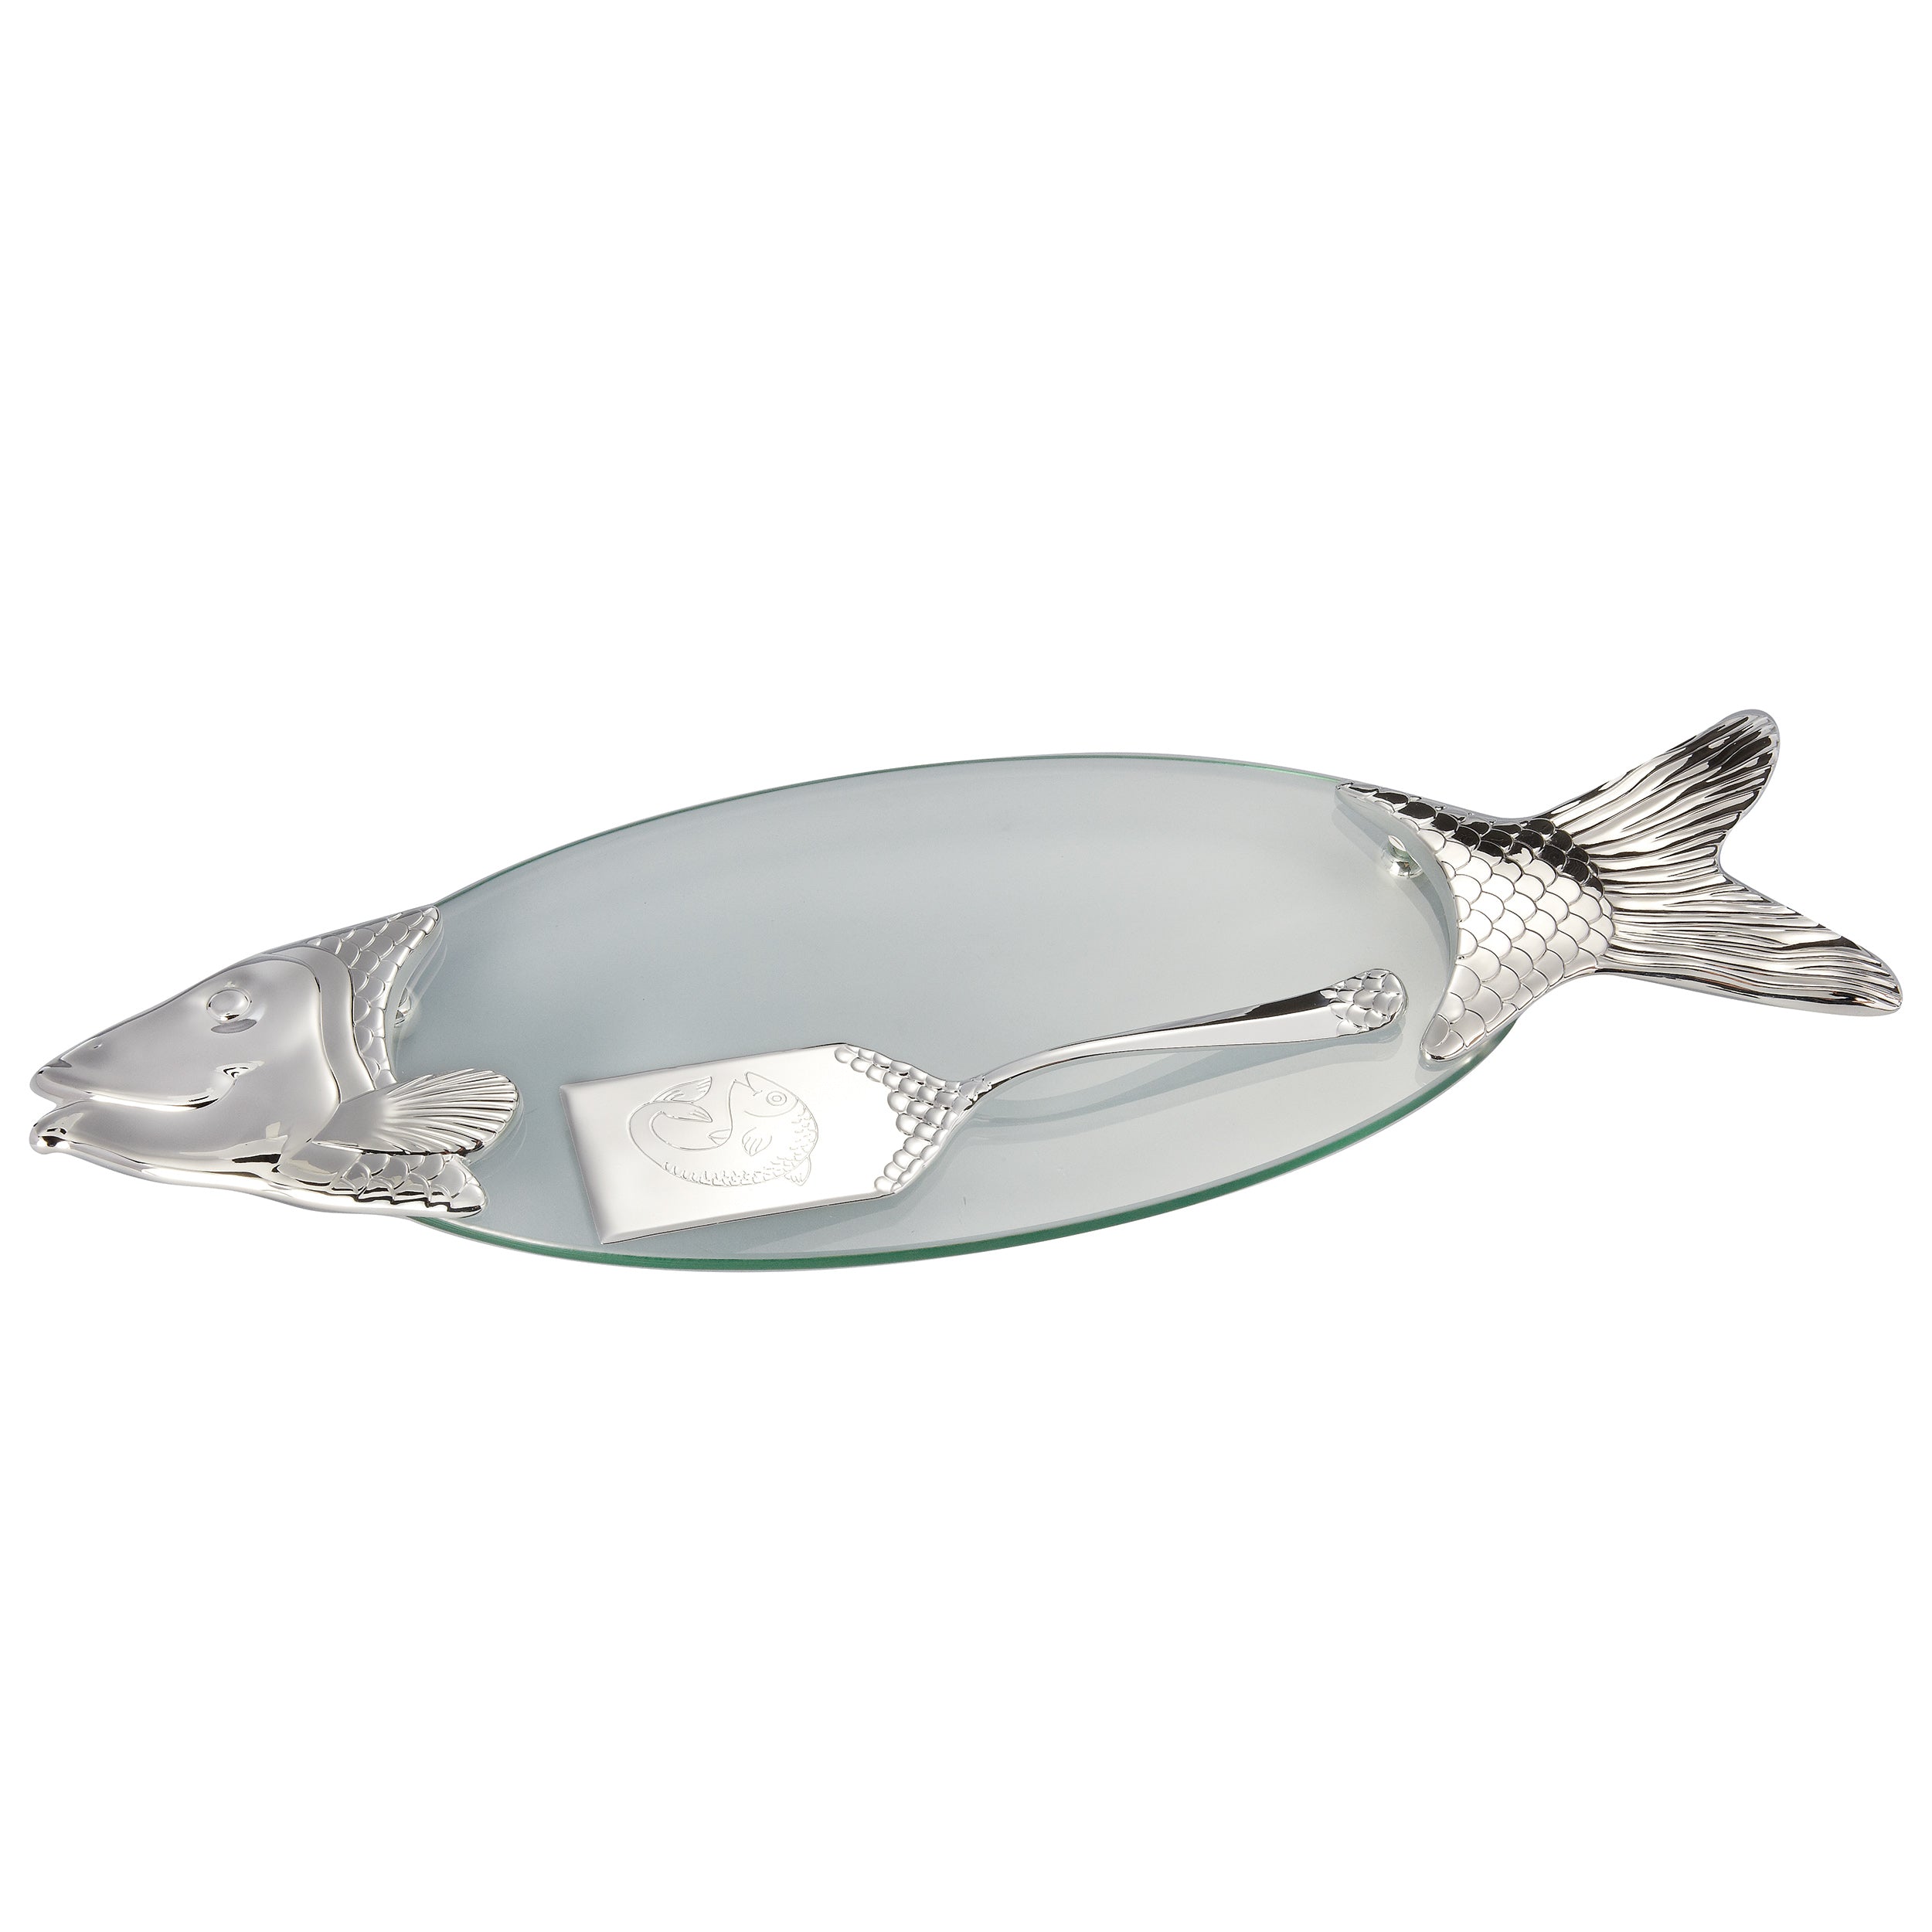 Fish Tray with Server